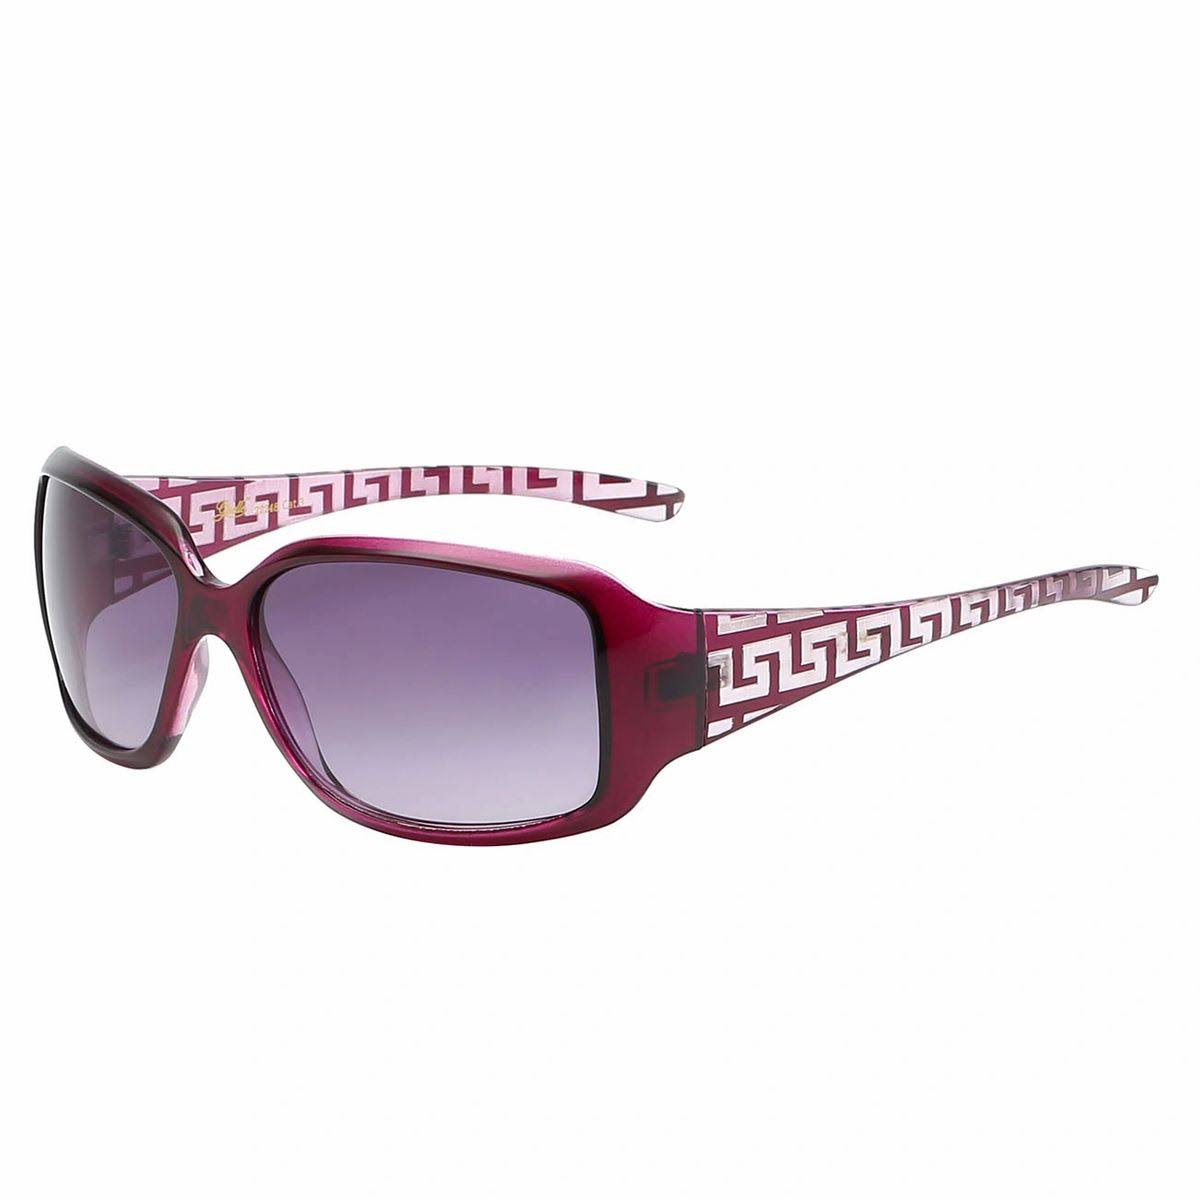 Giselle Contemporary Collection Sunglasses